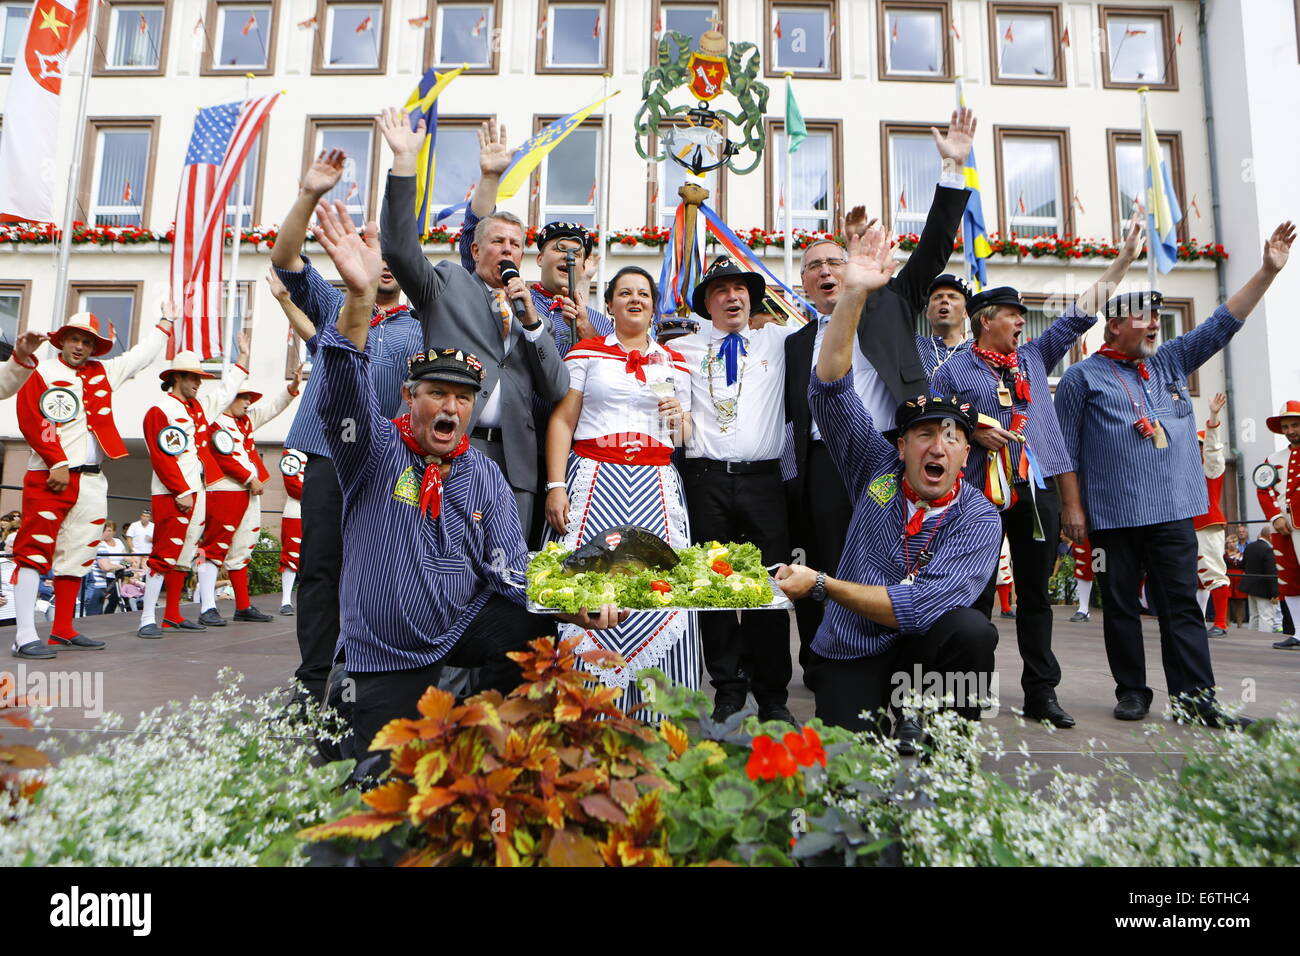 Germany. 30th Aug, 2014. The Lord Mayor of Worms, Michael Kissel (left), the BojemŠŠschter vun de FischerwŠŠd (Mayor of the fishermen's lea), Markus Trapp (2nd right), his bride Natascha Schlereth (2nd left) and the Secretary of State of the Ministry of the Interior of Rhineland-Palatinate, GŸnter Kern (right) wave at the crowd. The Backfischfest started in Worms with the traditional handing over of power from the Lord Mayor to the Mayor of the FishermenÕs Lea. It is the largest wine fair along the Rhine that includes music and dances. Credit:  Michael Debets/Pacific Press/Alamy Live News Stock Photo